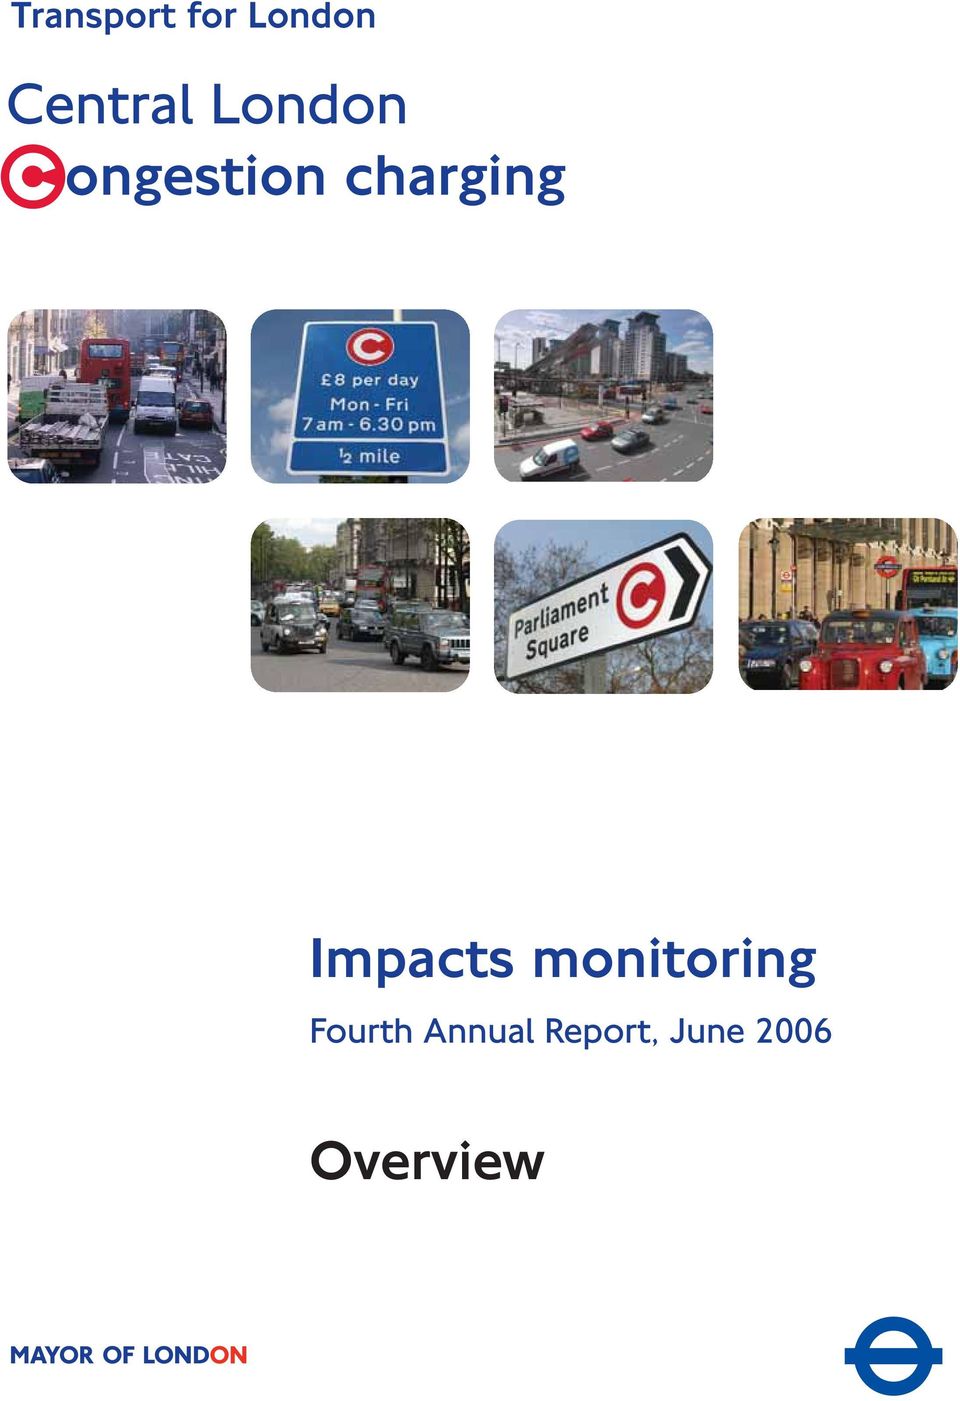 Impacts monitoring Fourth Annual